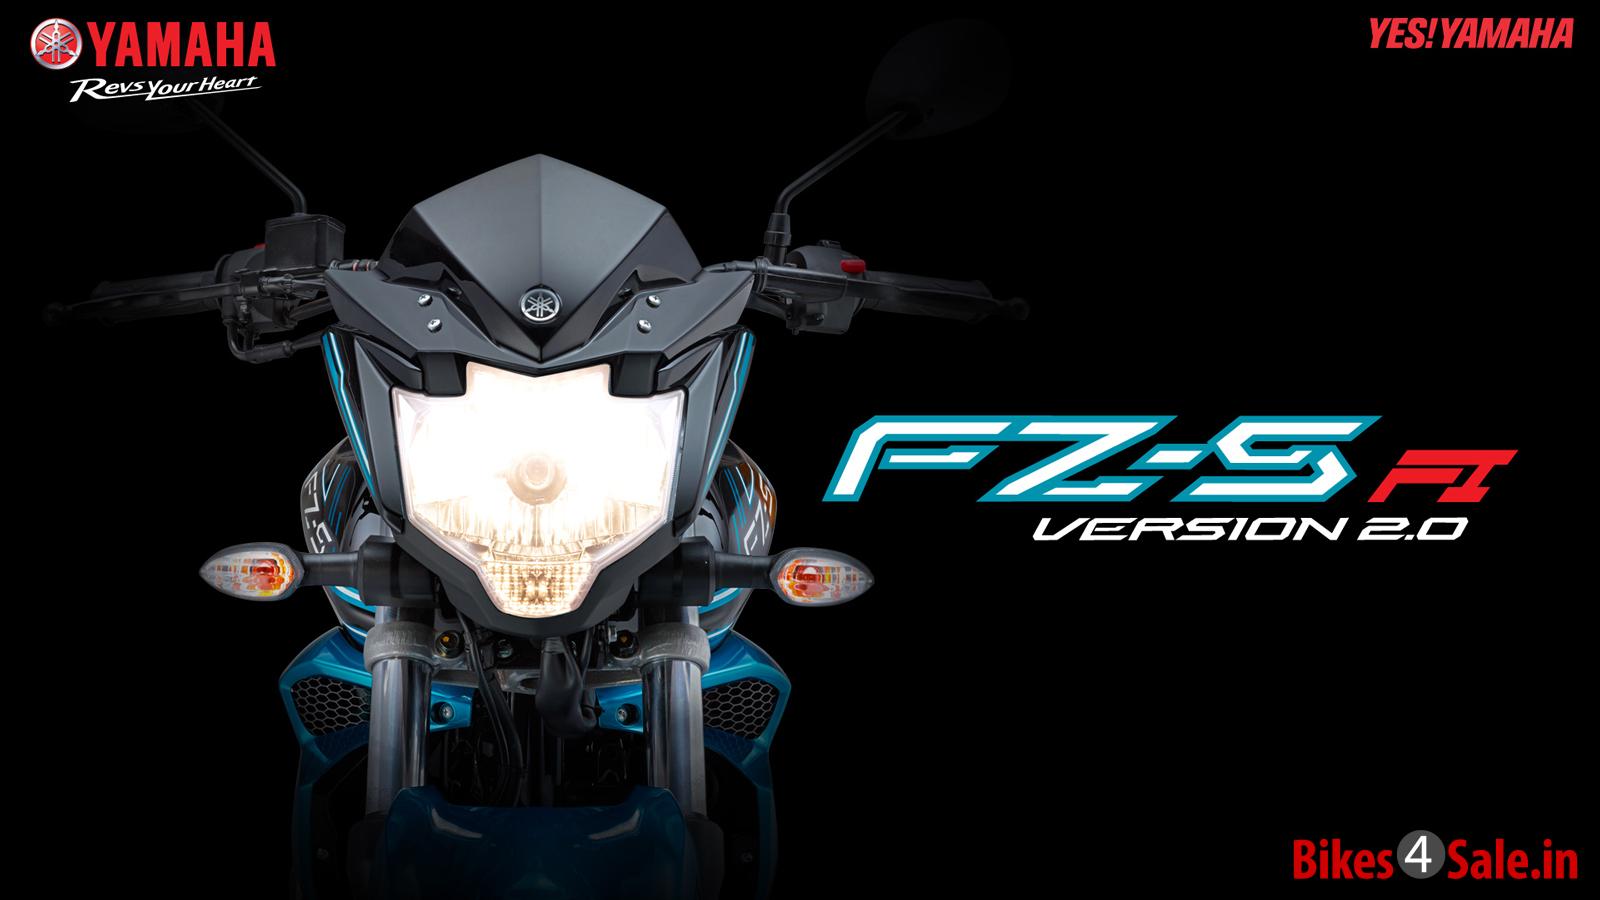 Yamaha Fz S Fi V2 Motorcycle Picture Gallery Bikes4sale